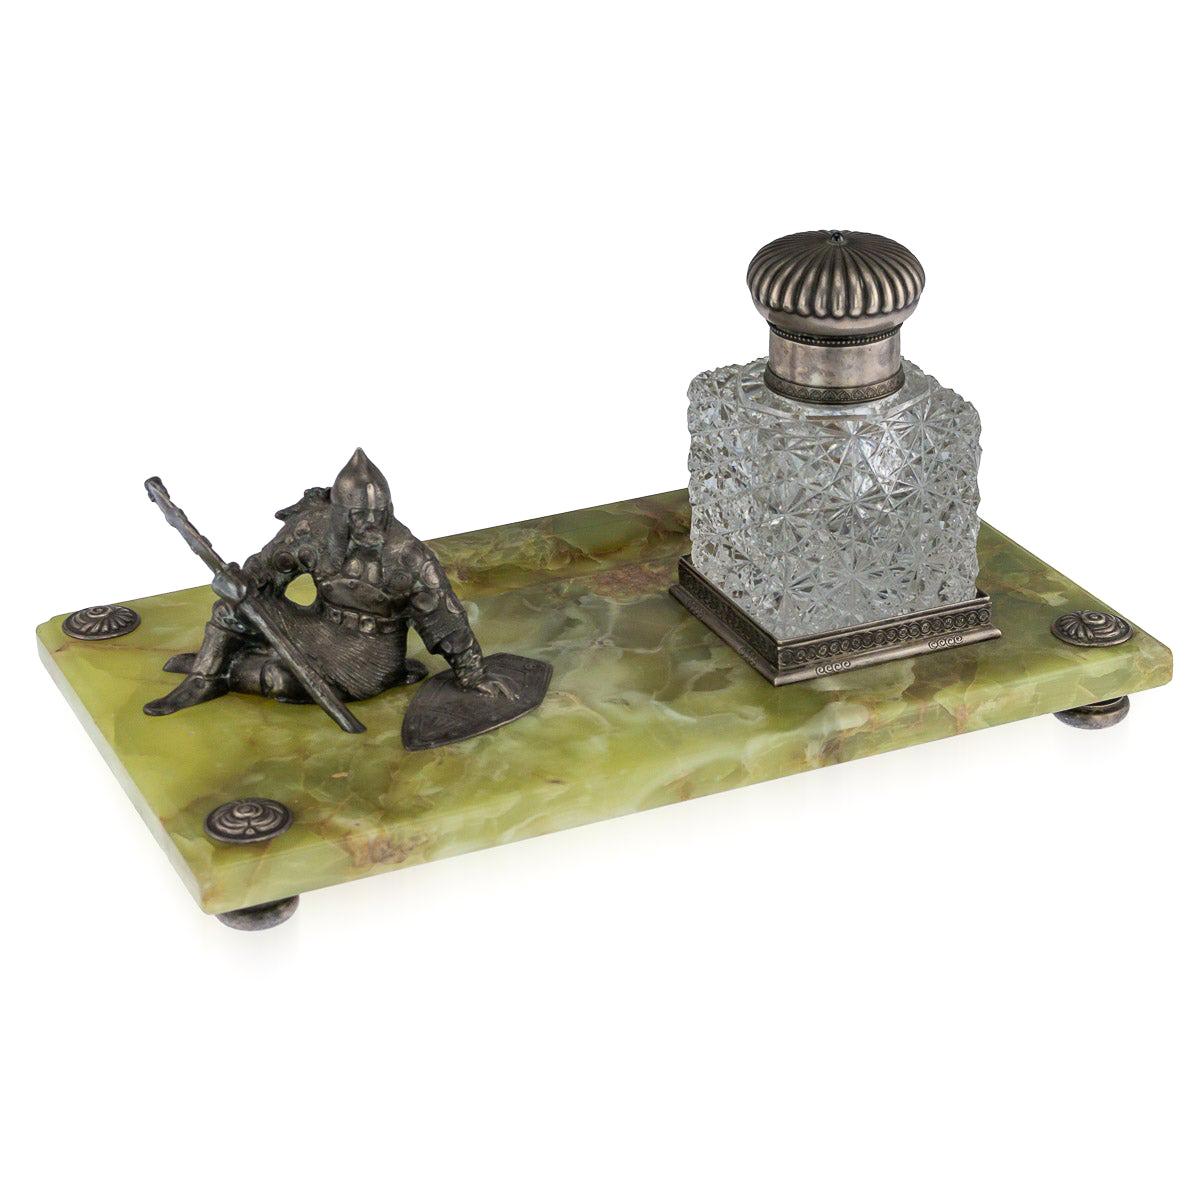 20th Century Russian Silver-Mounted on Green Marble Inkstand, circa 1900